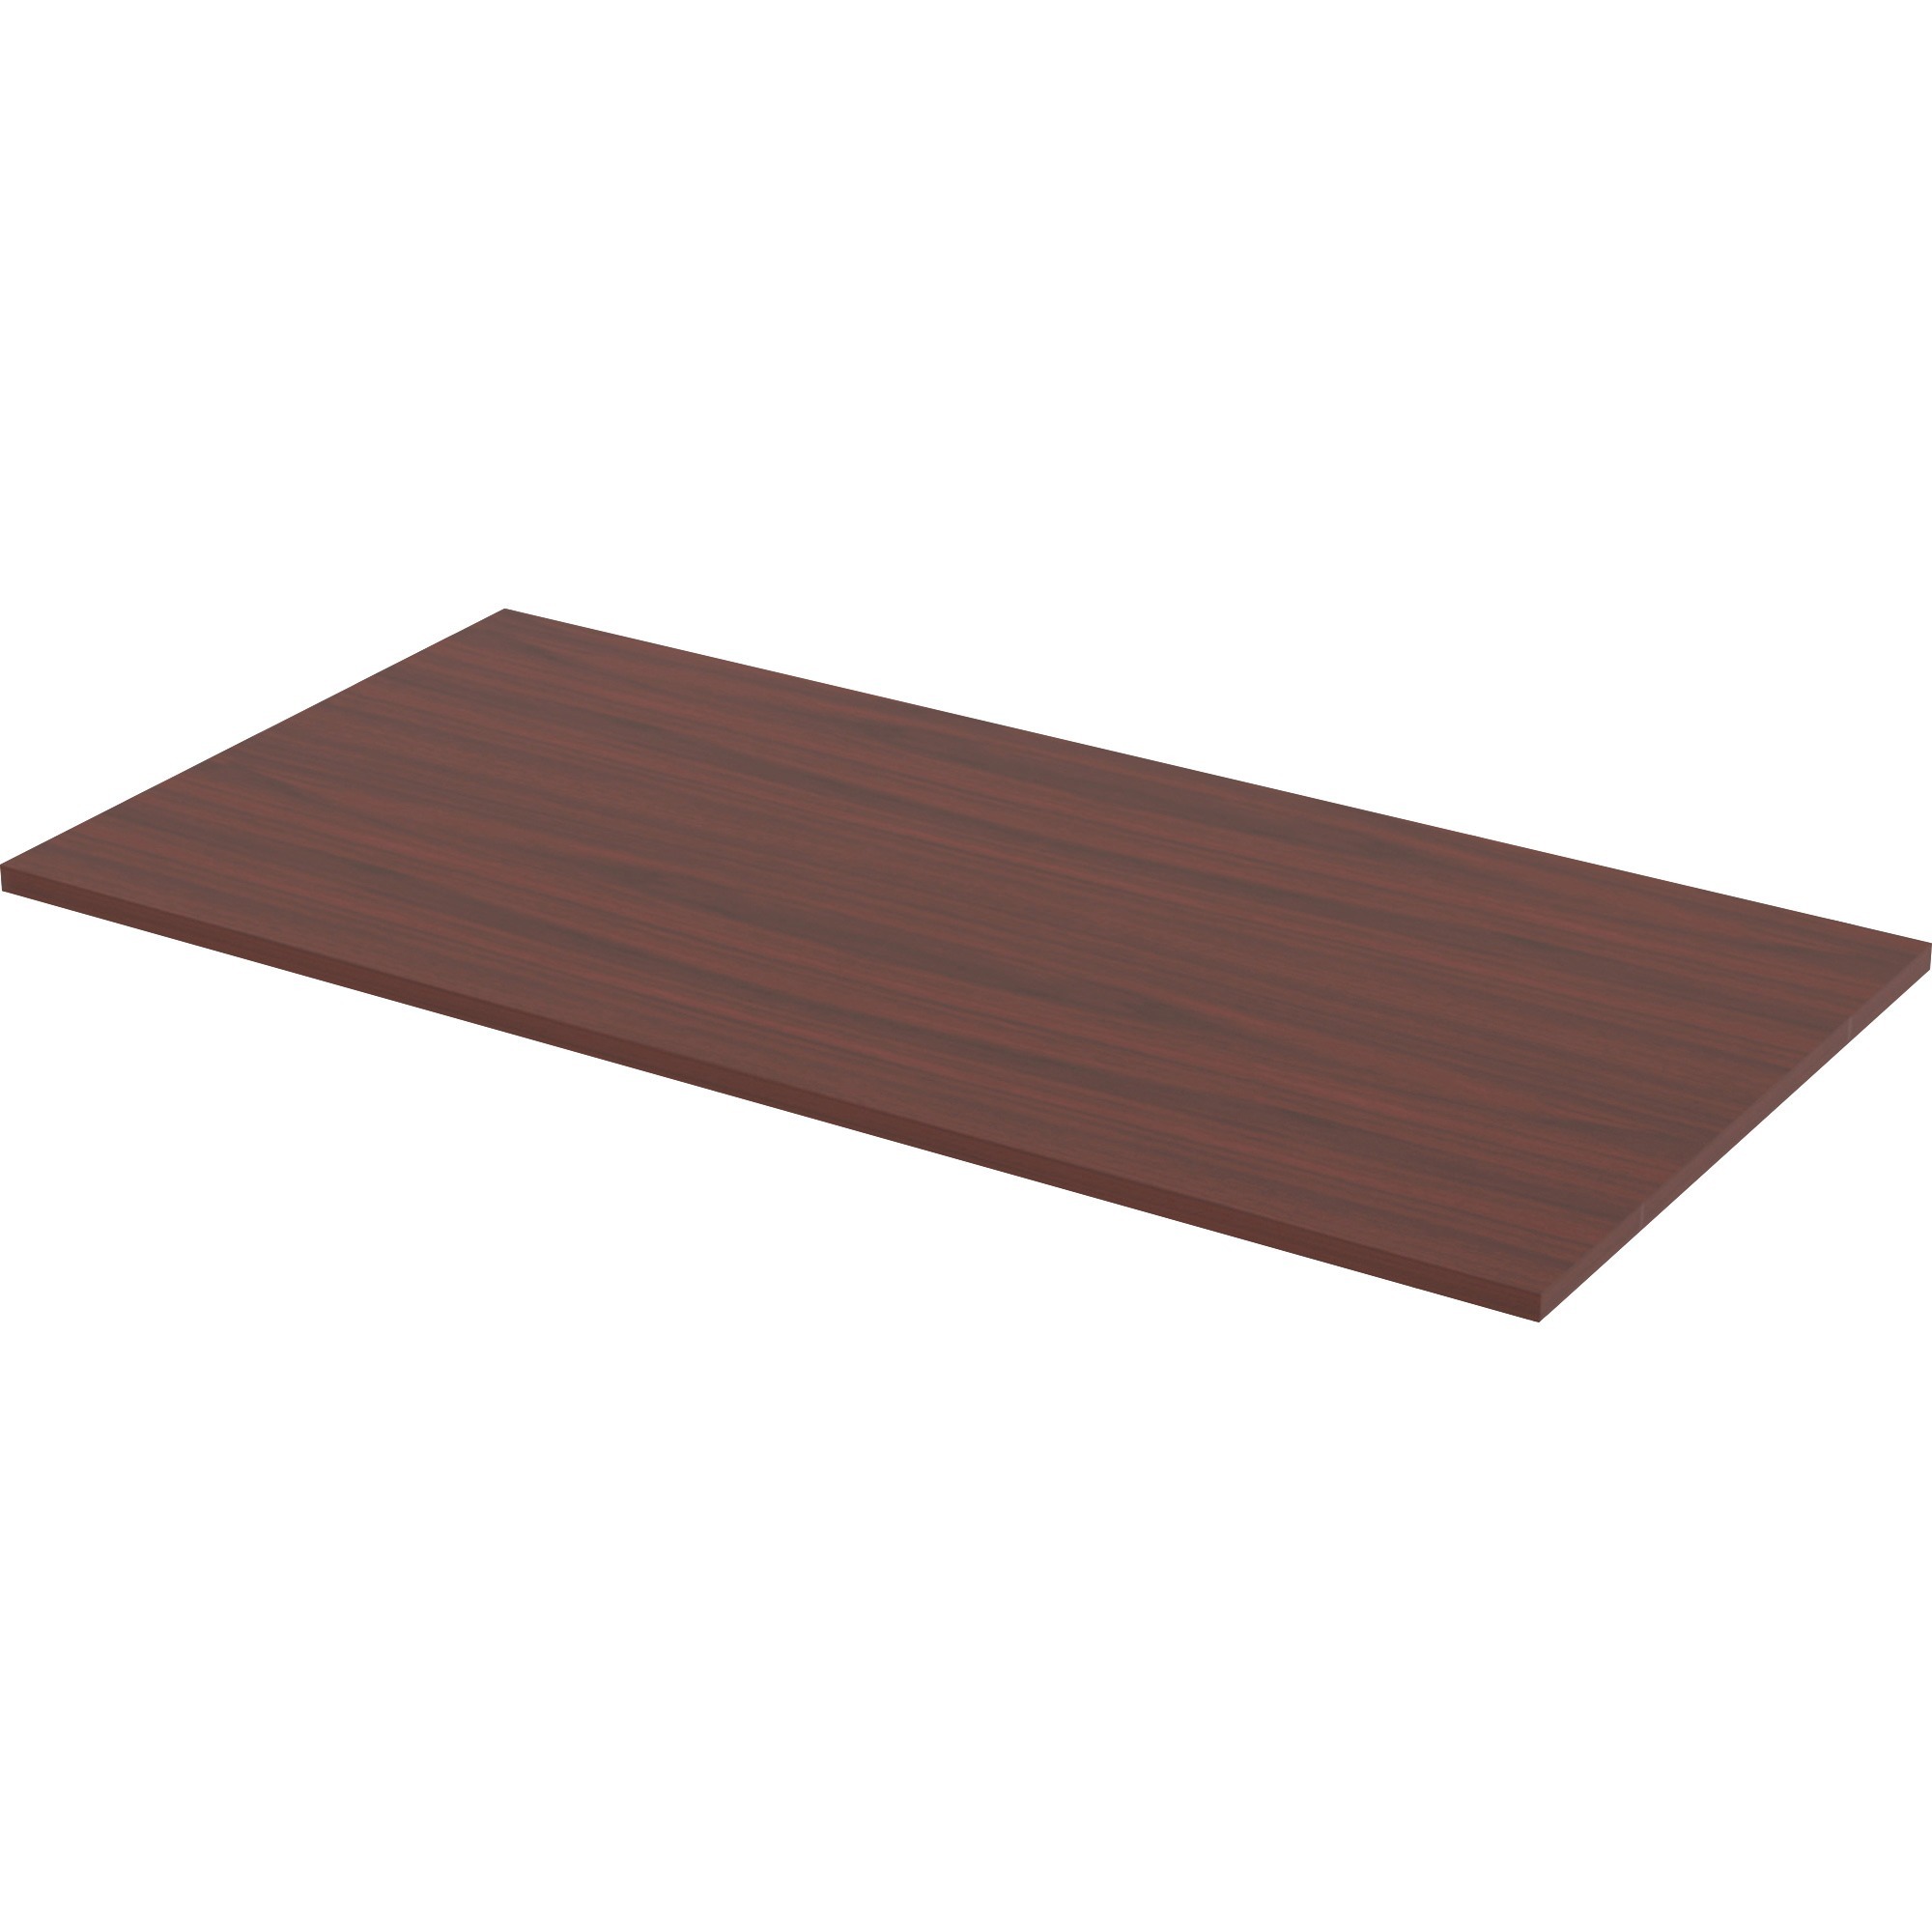 Laminated,Walnut Lorell 59610 Active Office Relevance Table Top 